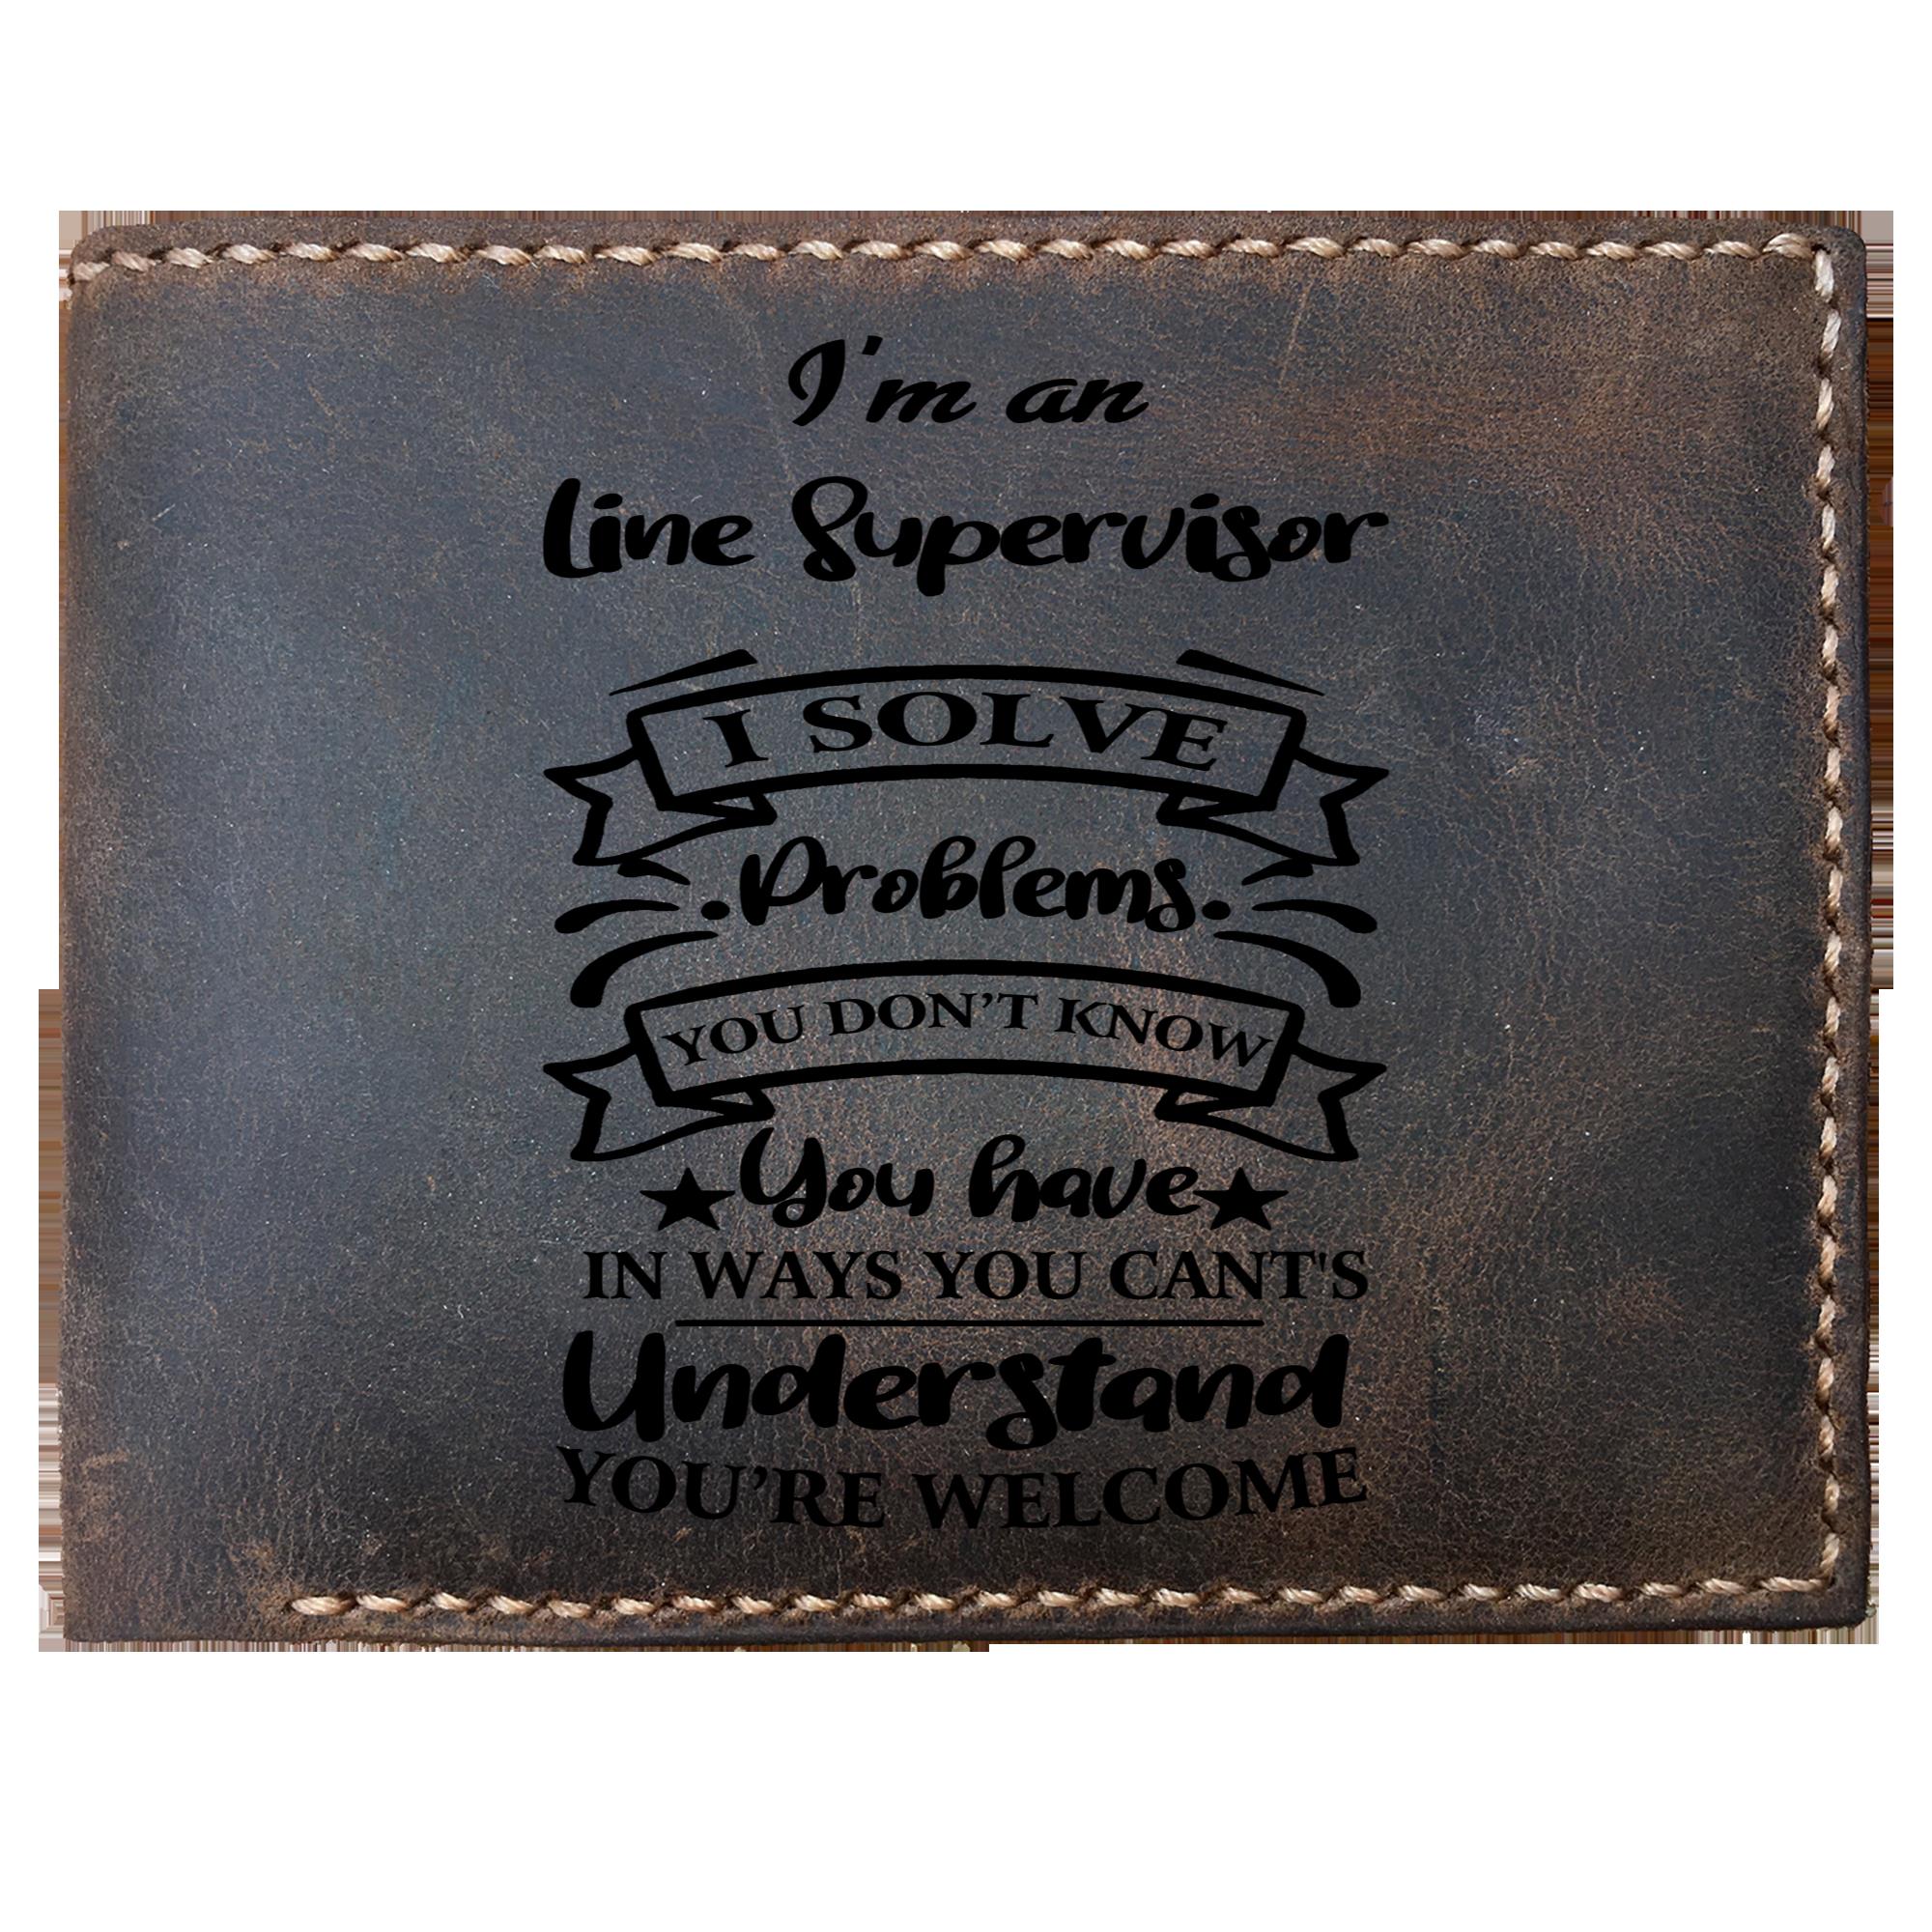 Skitongifts Funny Custom Laser Engraved Bifold Leather Wallet For Men, I'm an Line Supervisor Solve Problems, Father's Day Gifts